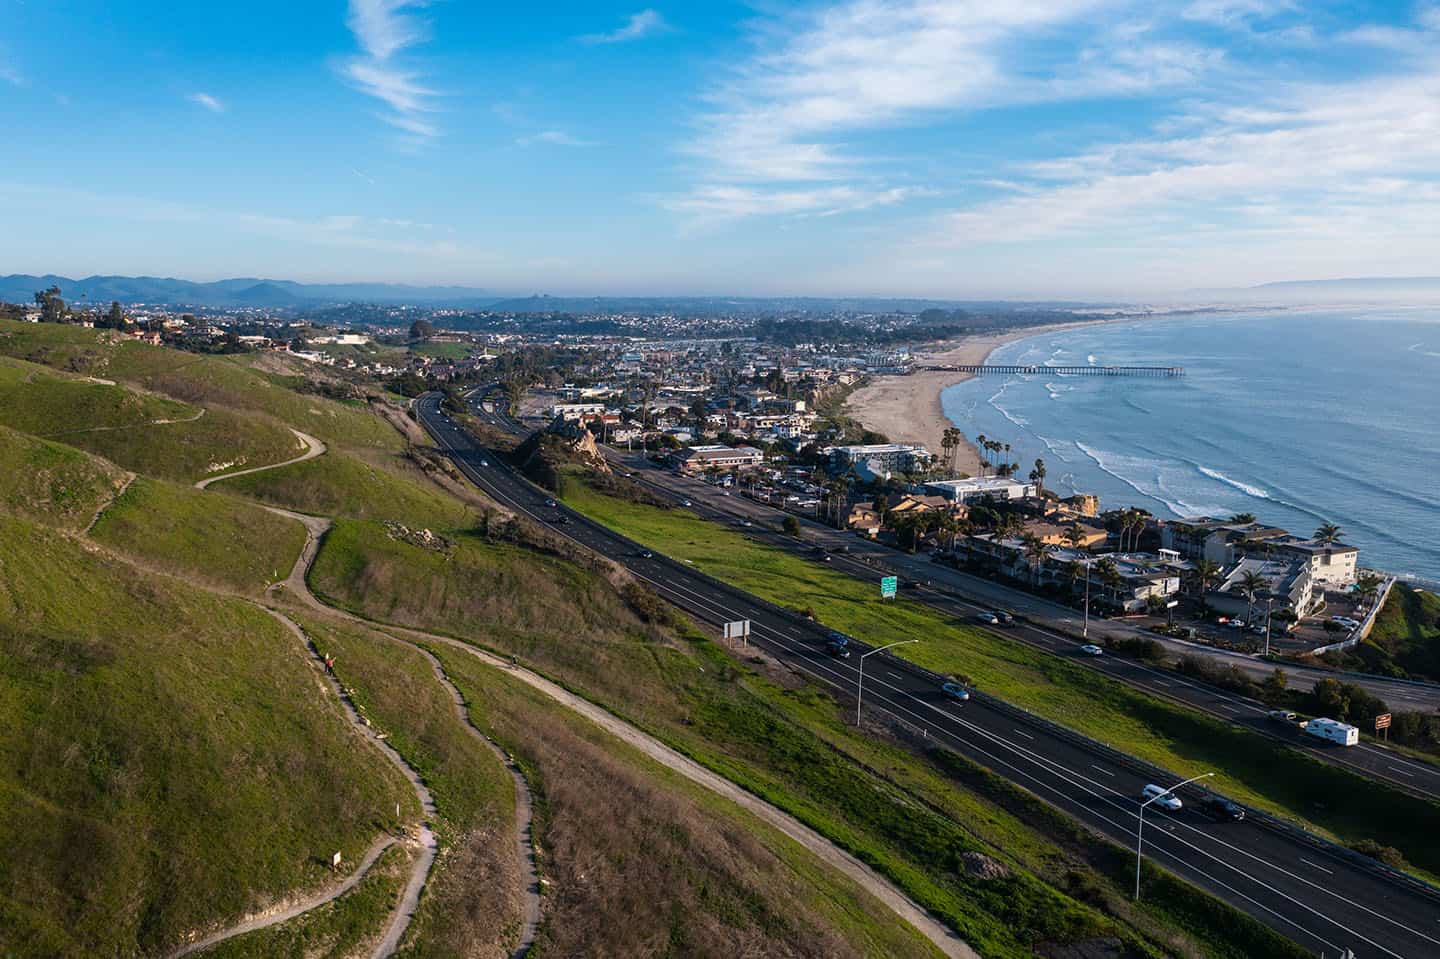 Aerial views from Pismo Beach Preserve